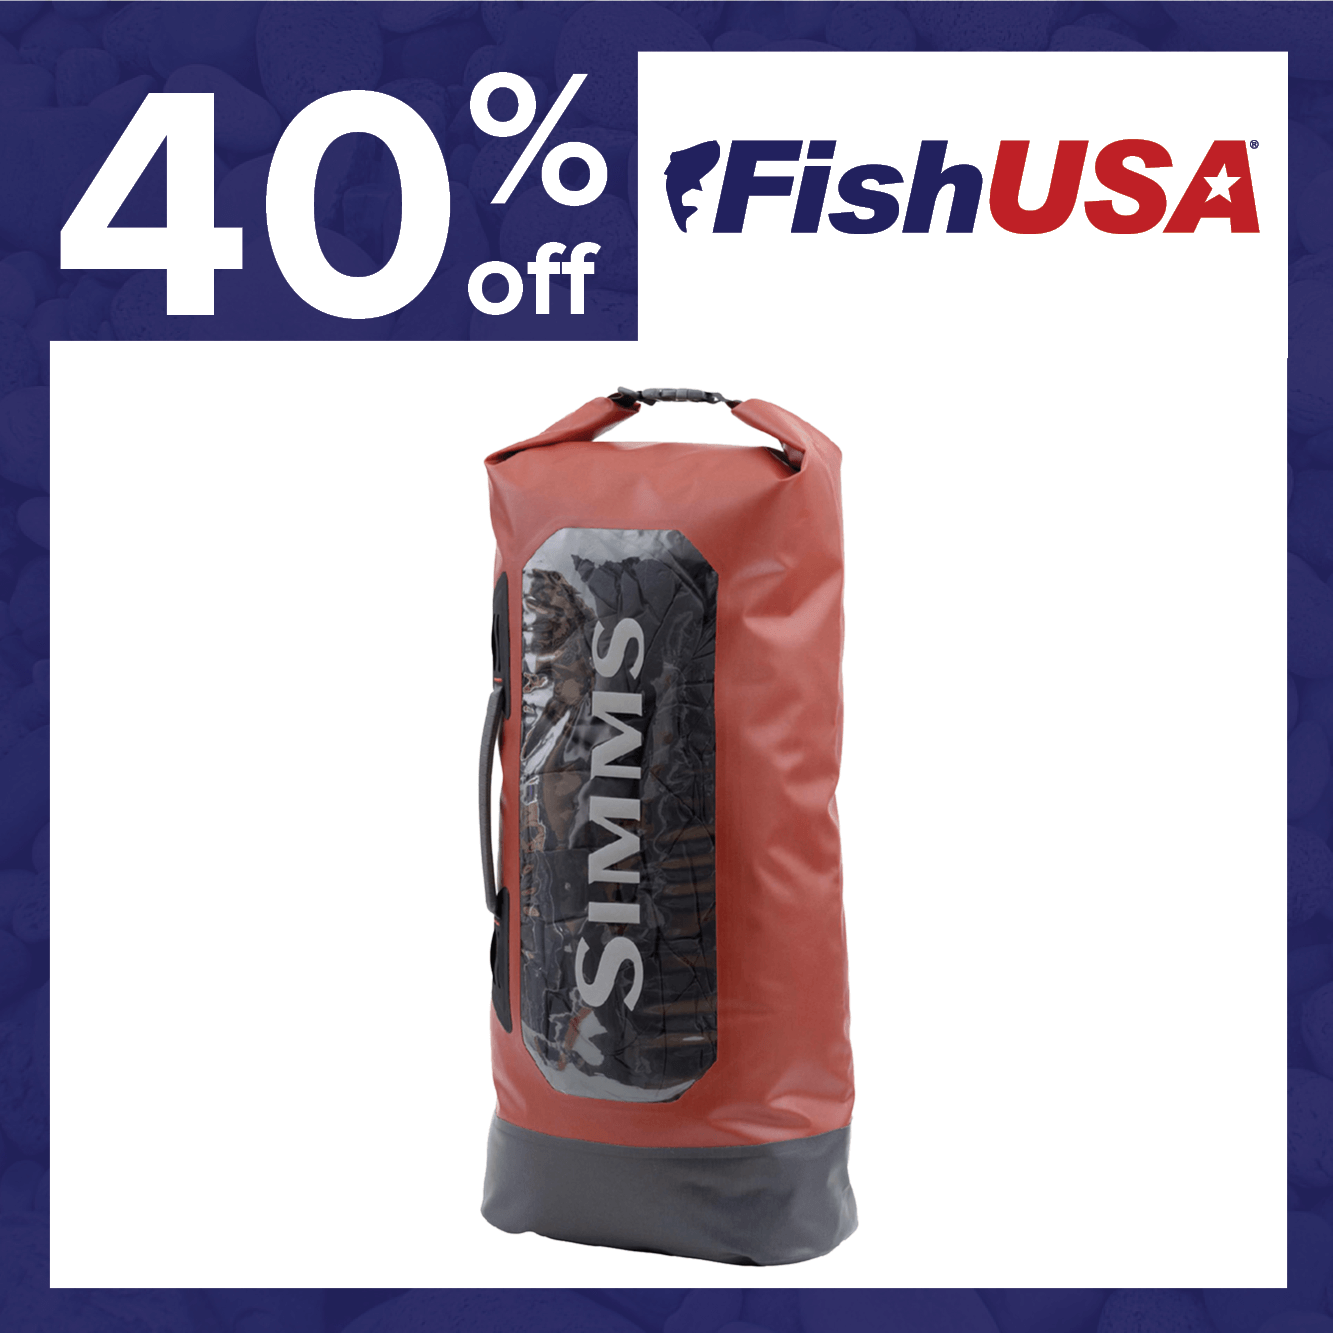 40% off the Simms Dry Creek Roll Top Bag